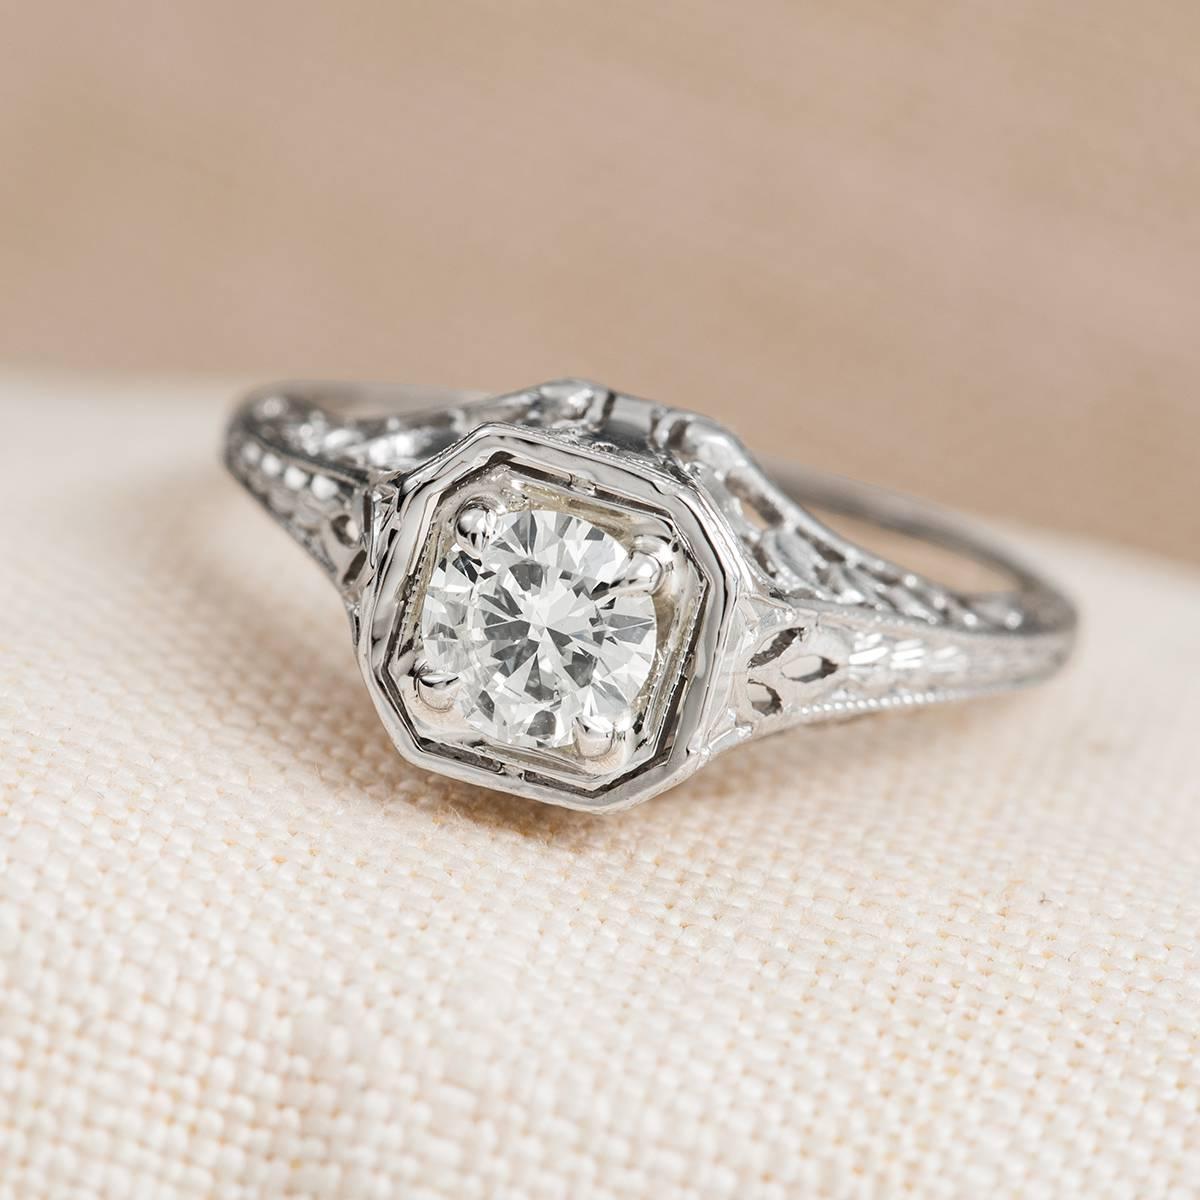 Platinum engagement ring with round brilliant diamond .51 carats total weight featuring an M color and SI2 clarity. Pierced and engraved shank. Size 6 and can be sized up or down complimentary with purchase